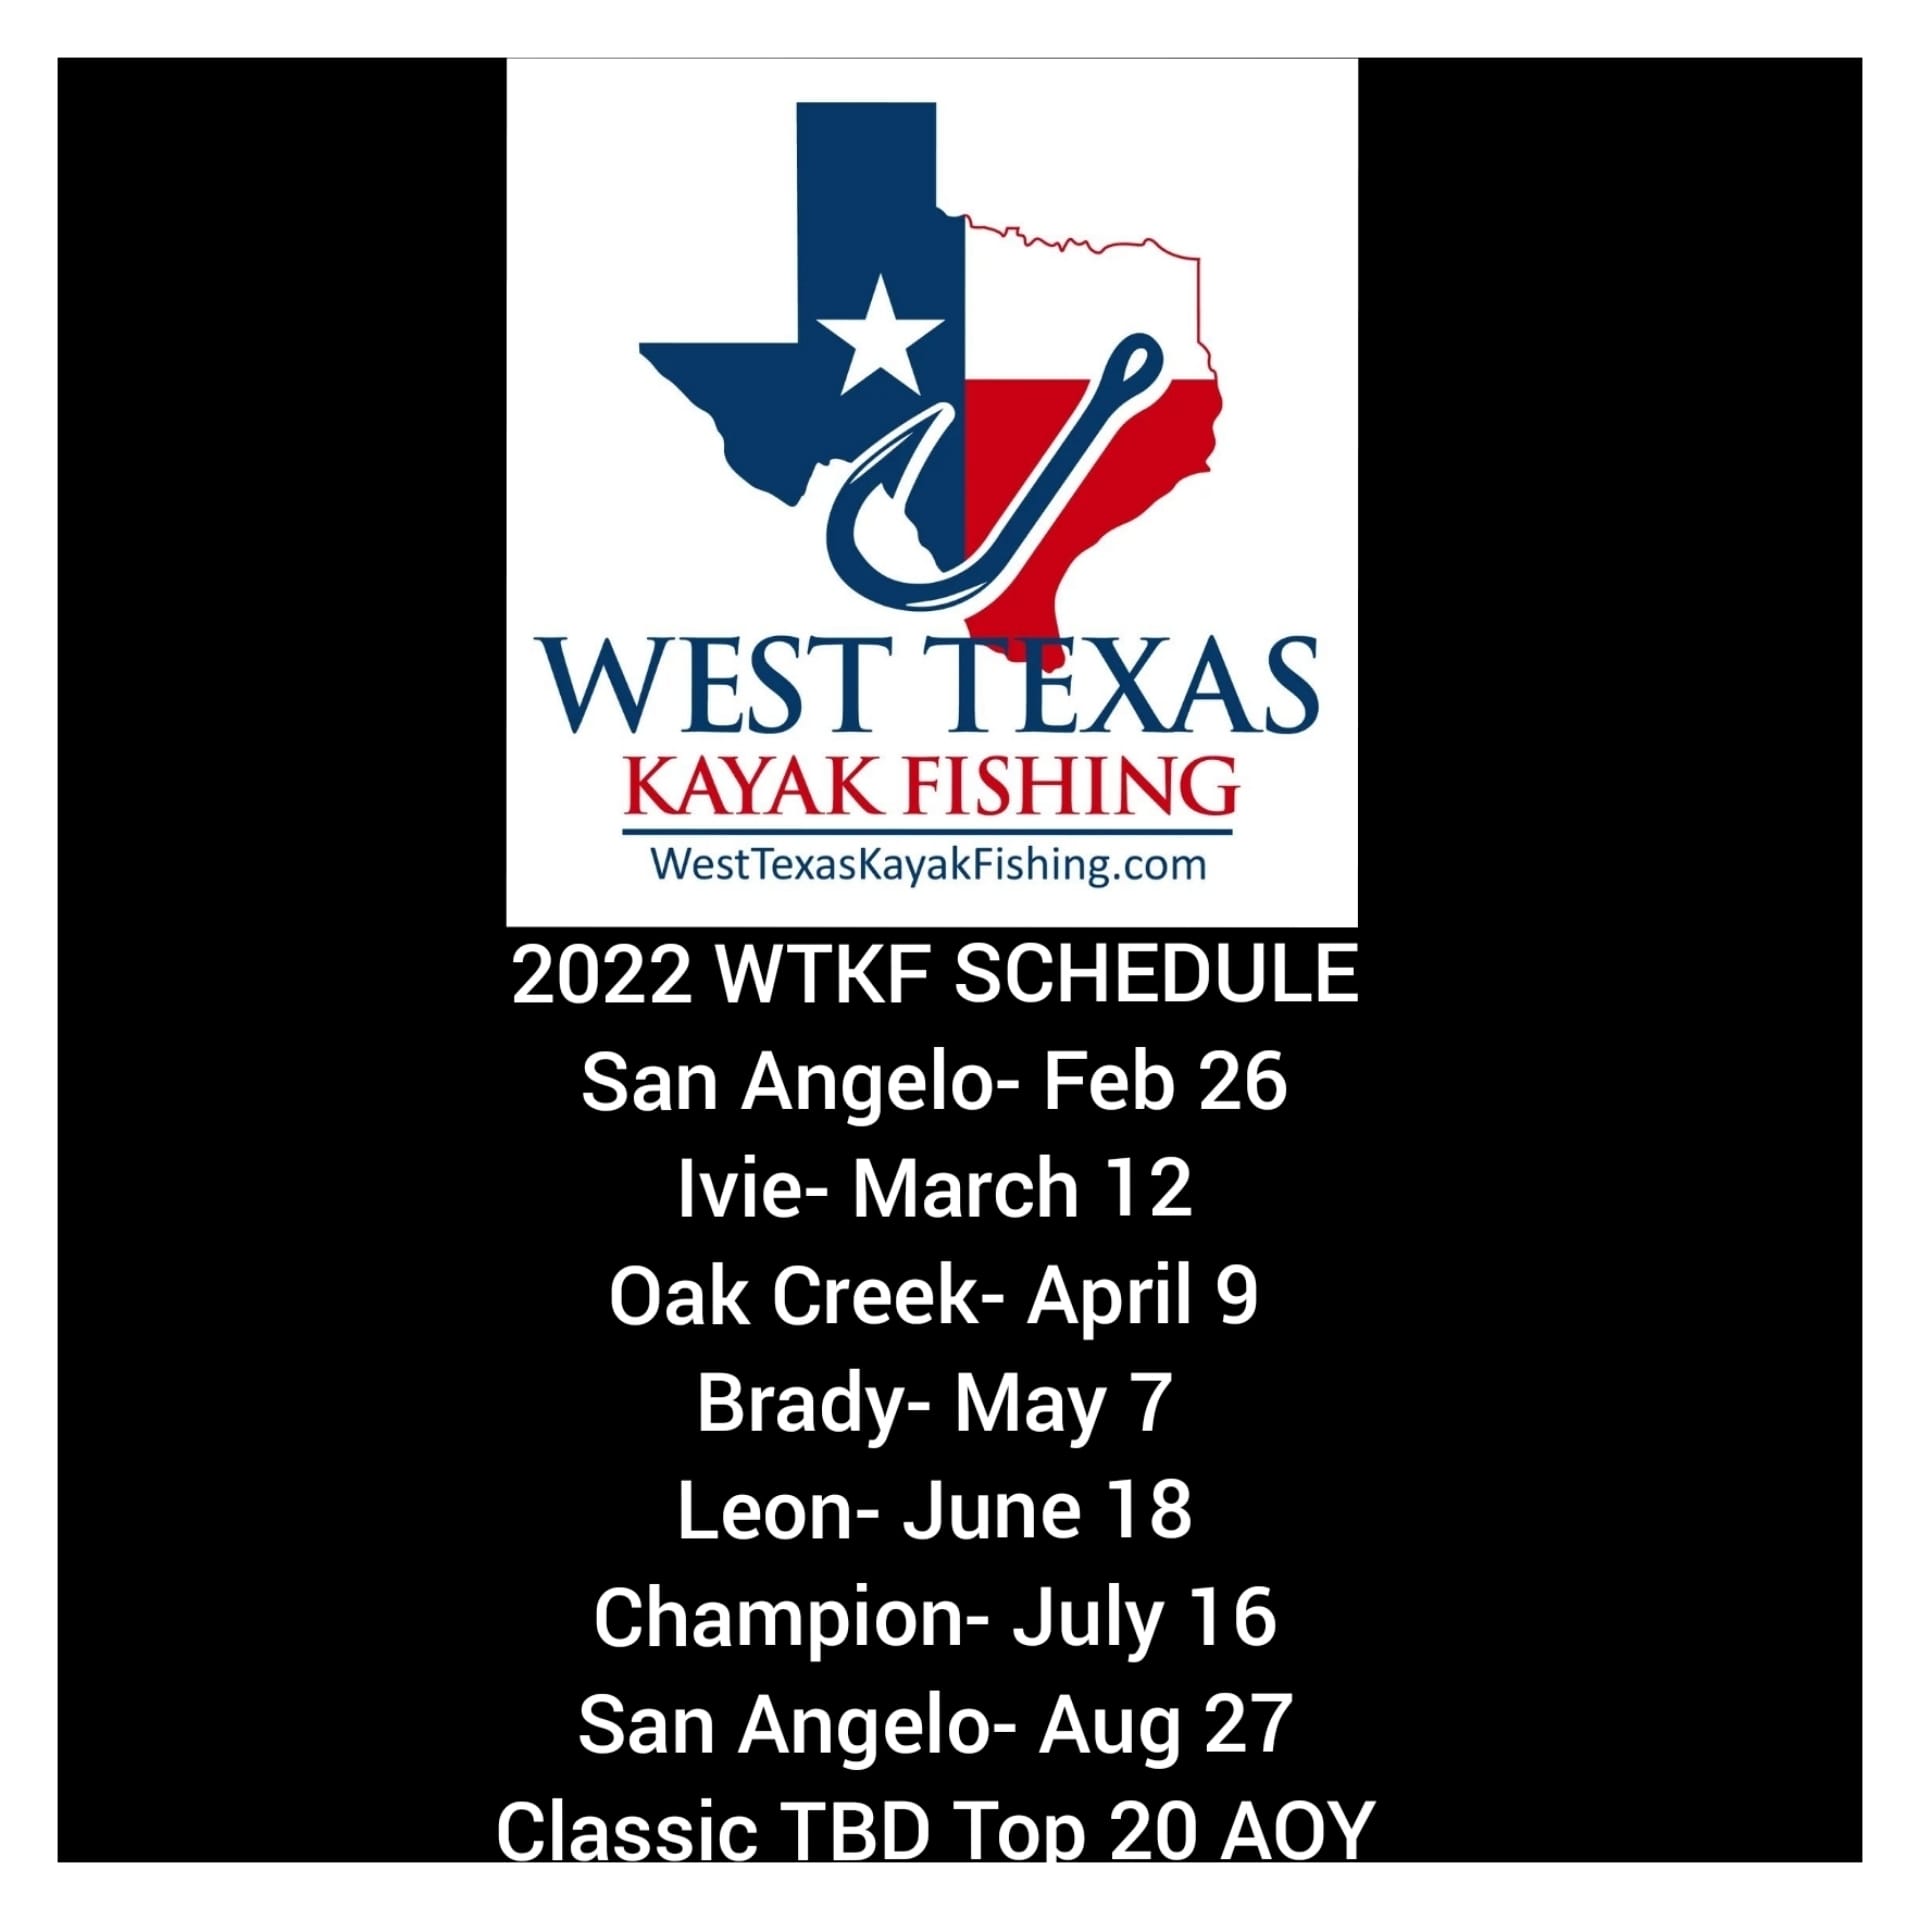 The 2022 schedule for WTKF